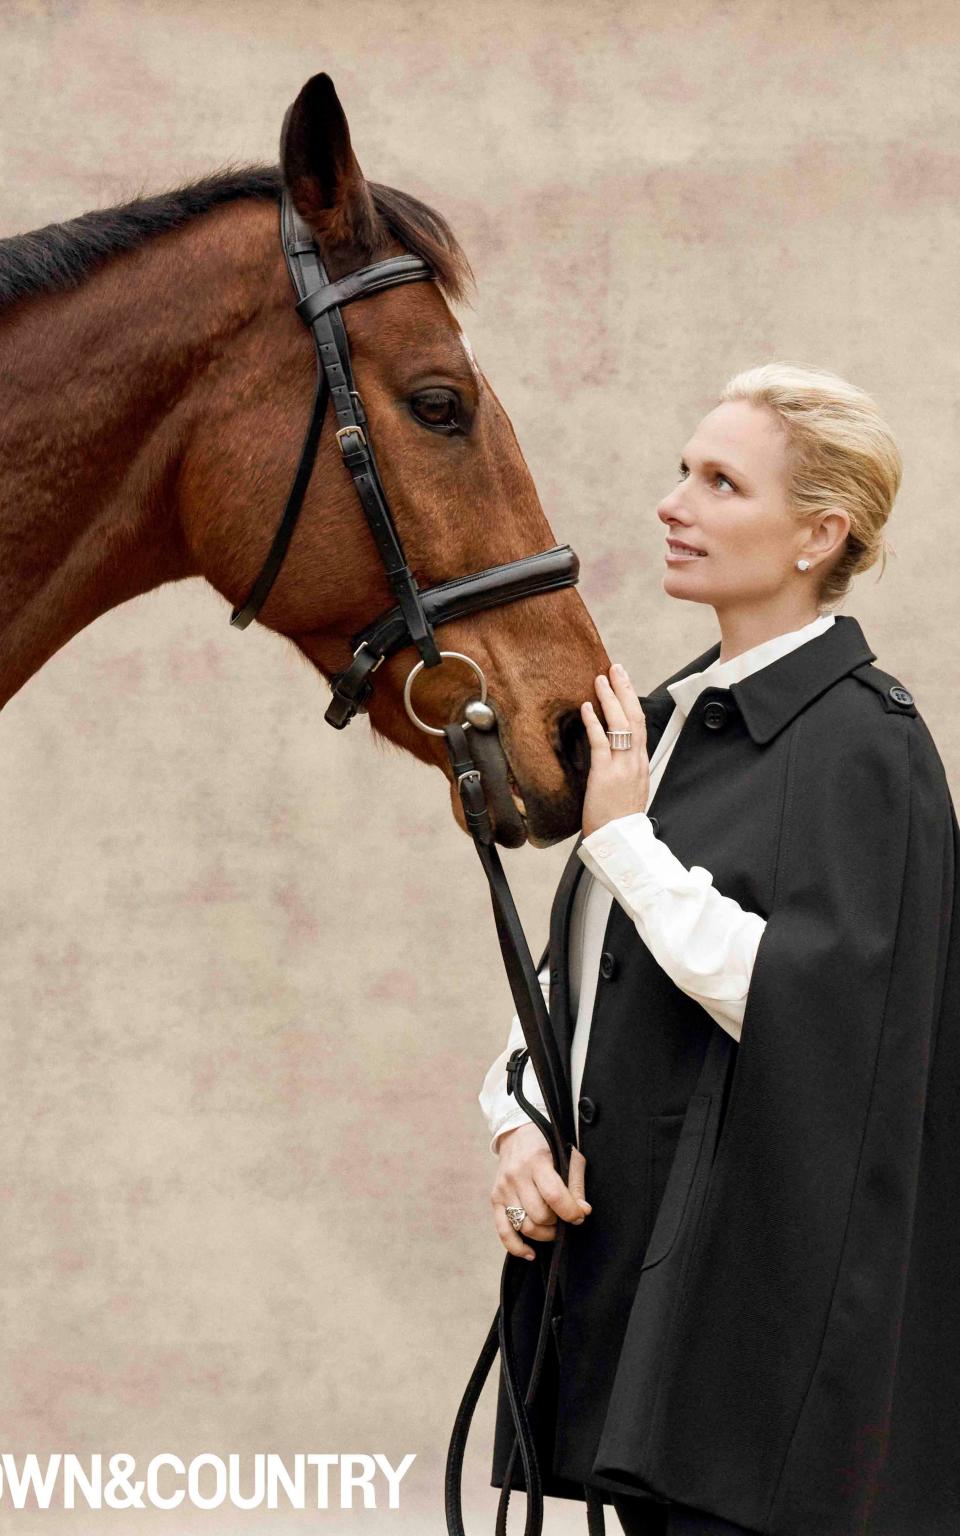 Zara Tindall: I didn't wear rings until Mike proposed